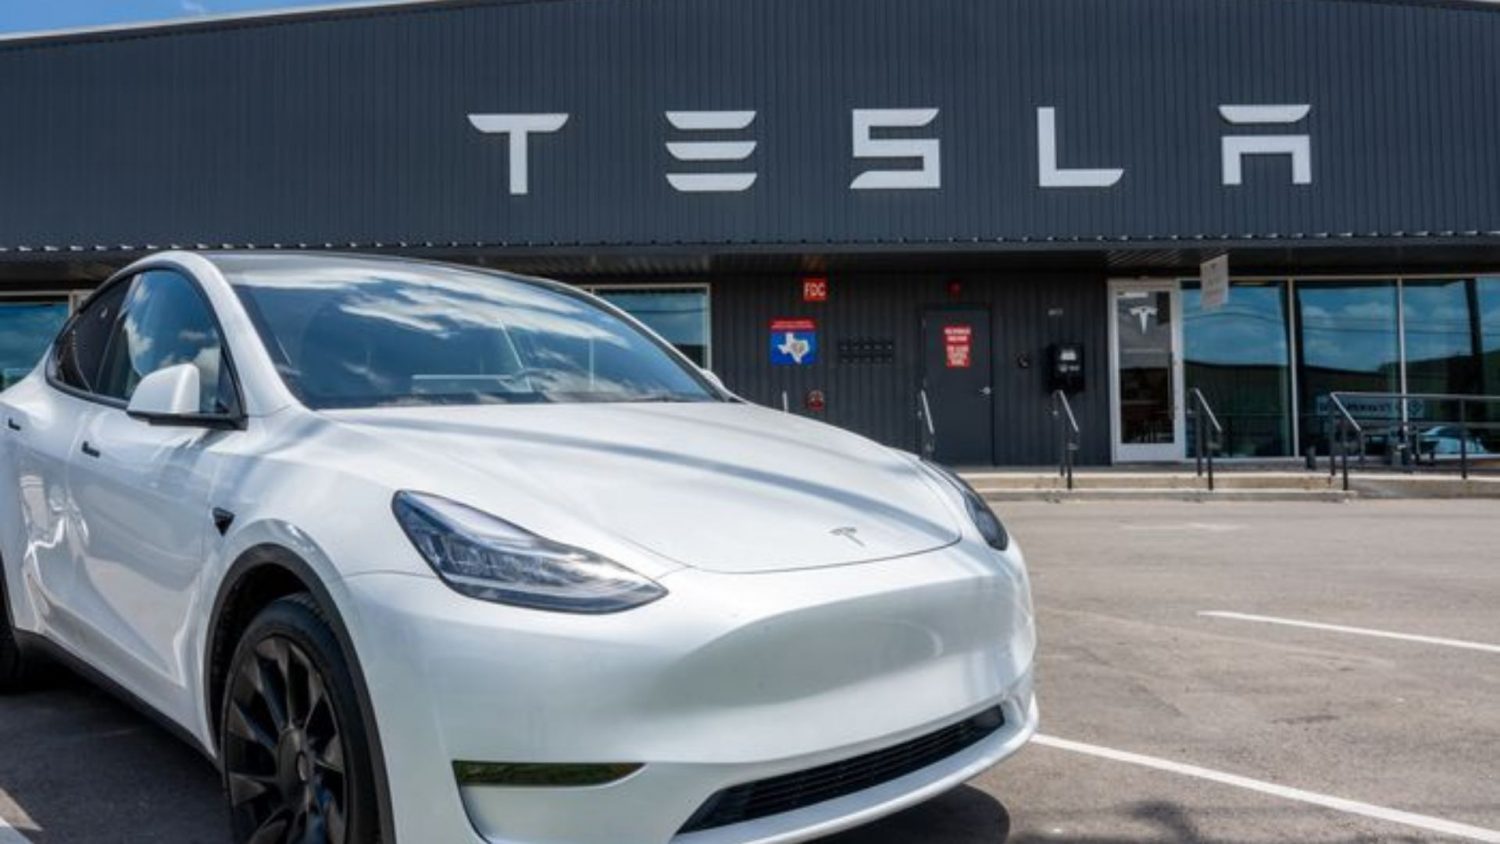 Tesla is slashing the prices of its Model 3 compact sedan and Model Y SUV in the U.S., intensifying its price war only days after the world's most valuable automaker's third-quarter deliveries fell short of market estimates.